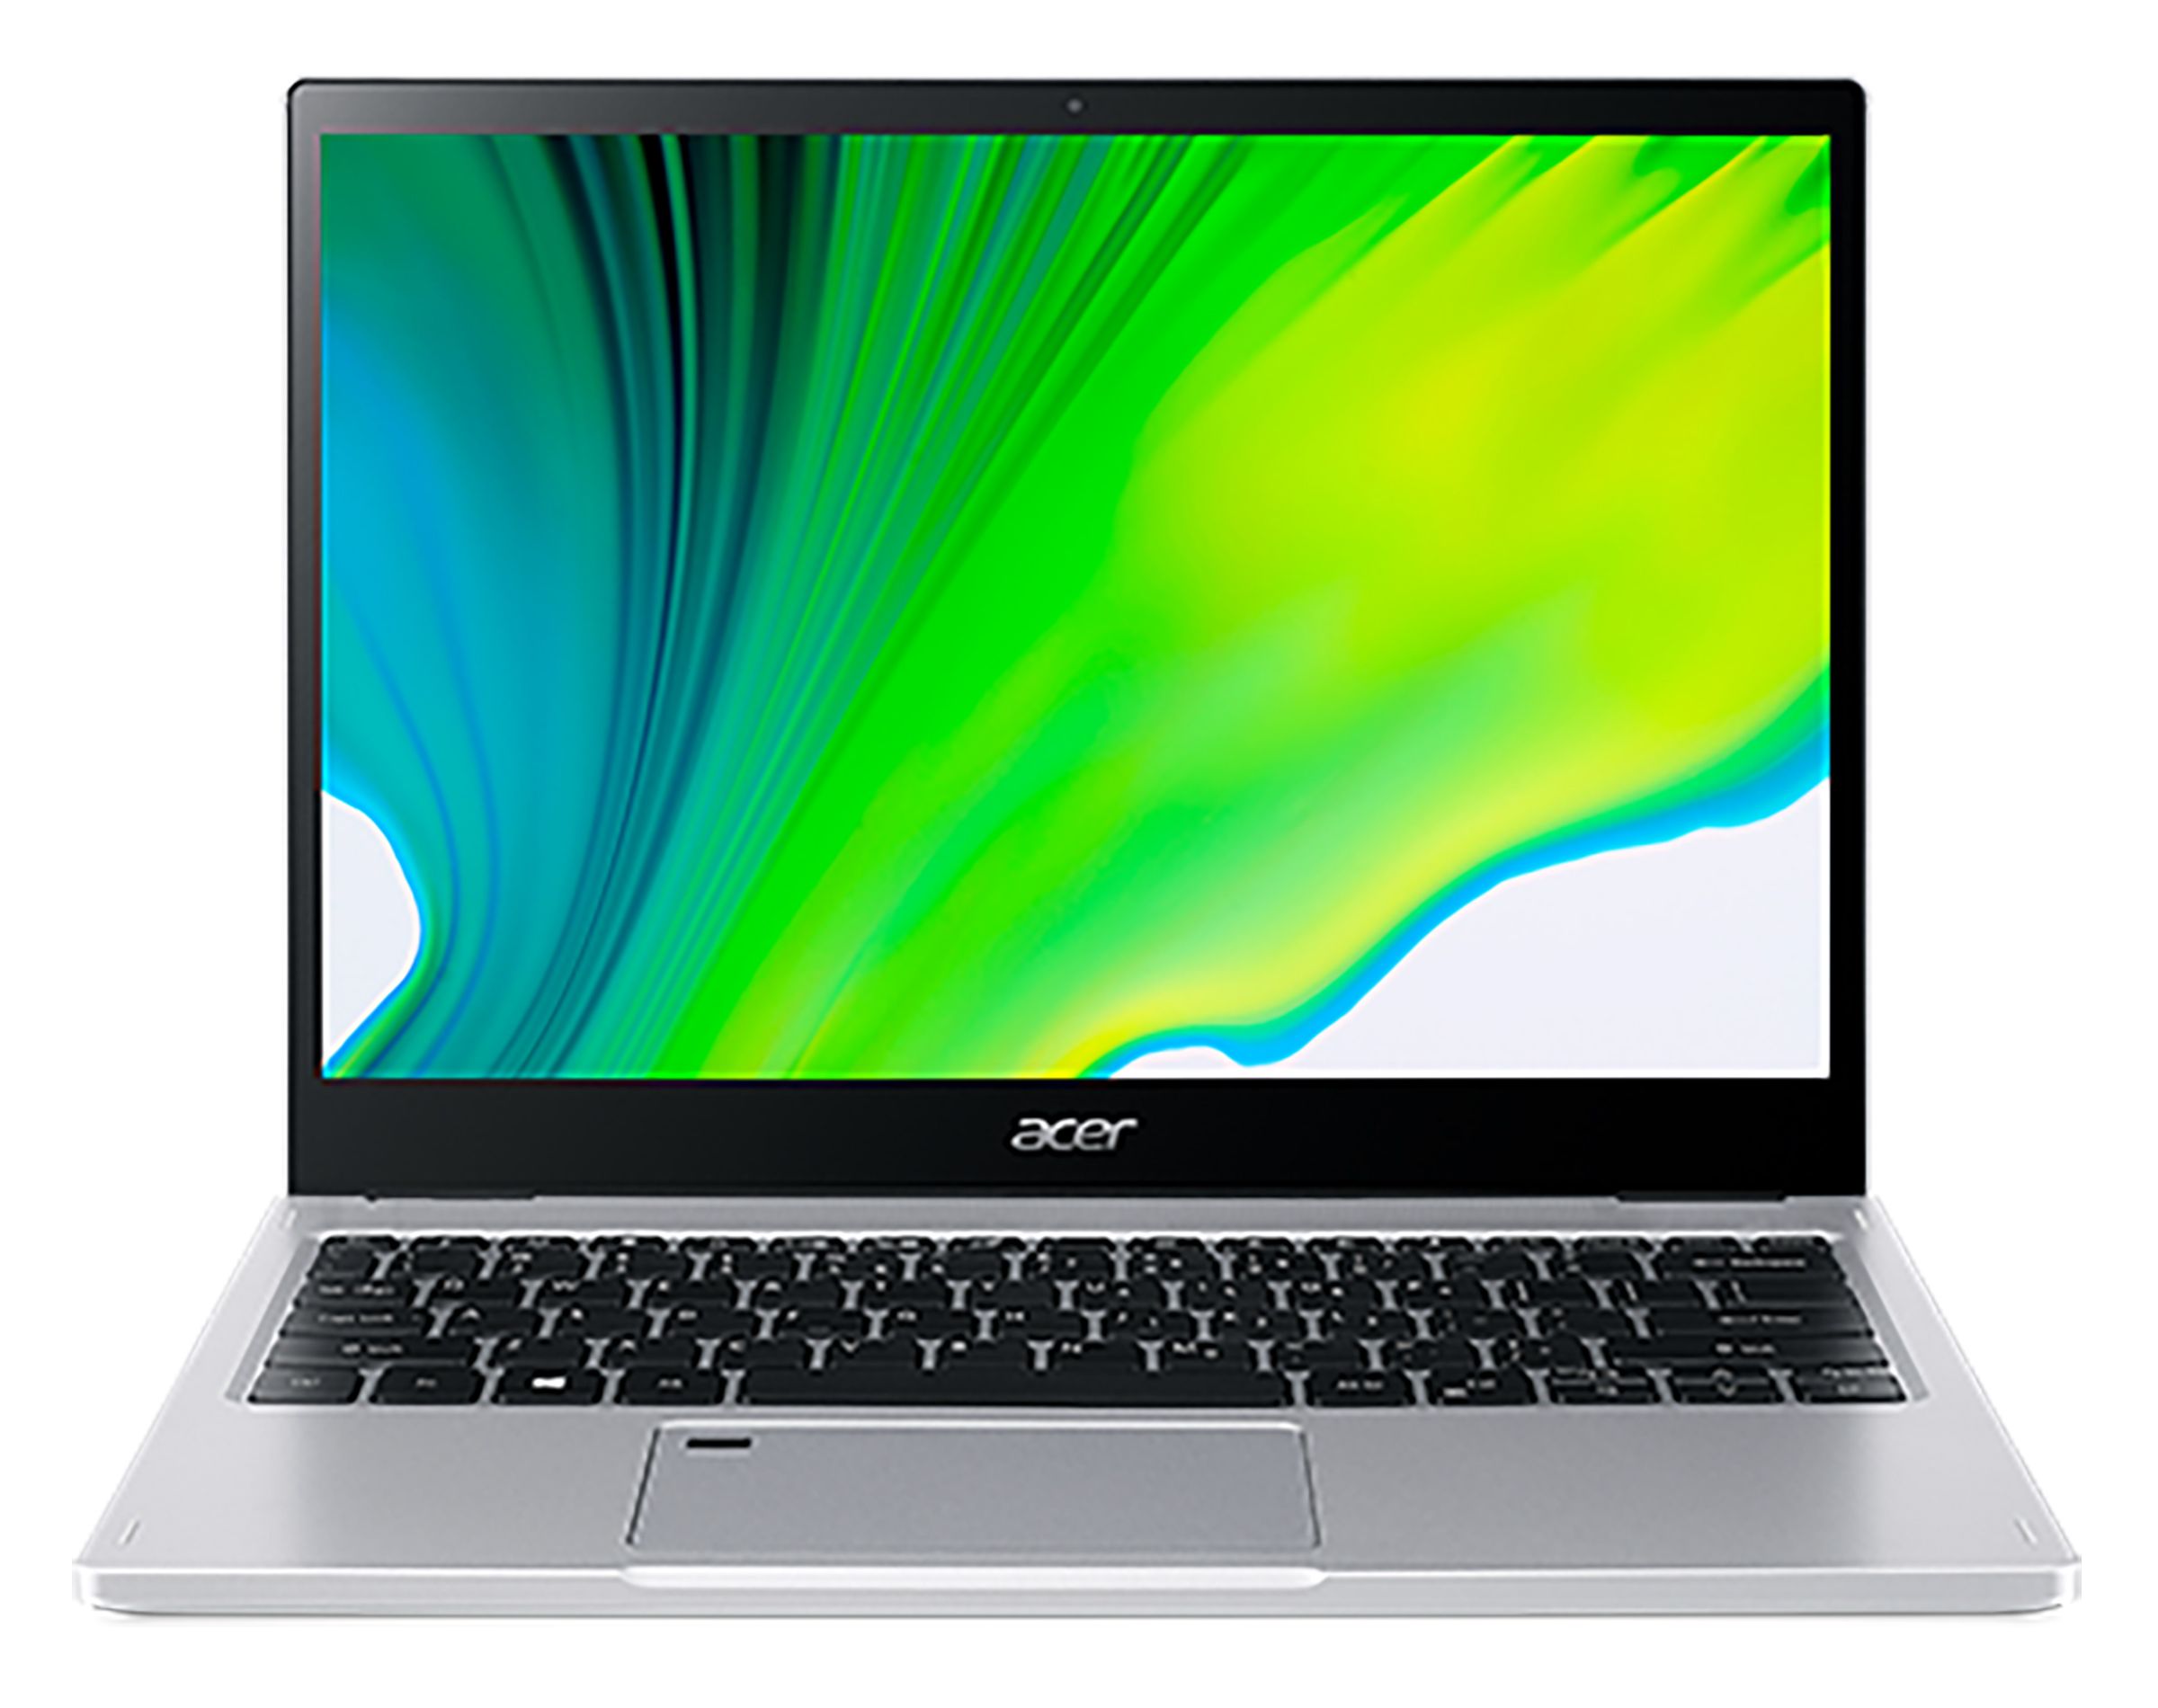 Fingerhut - Acer Spin 13.3" Full HD+ Touch Intel Core i5 8GB Memory SSD Windows 10 Convertible Laptop Computer